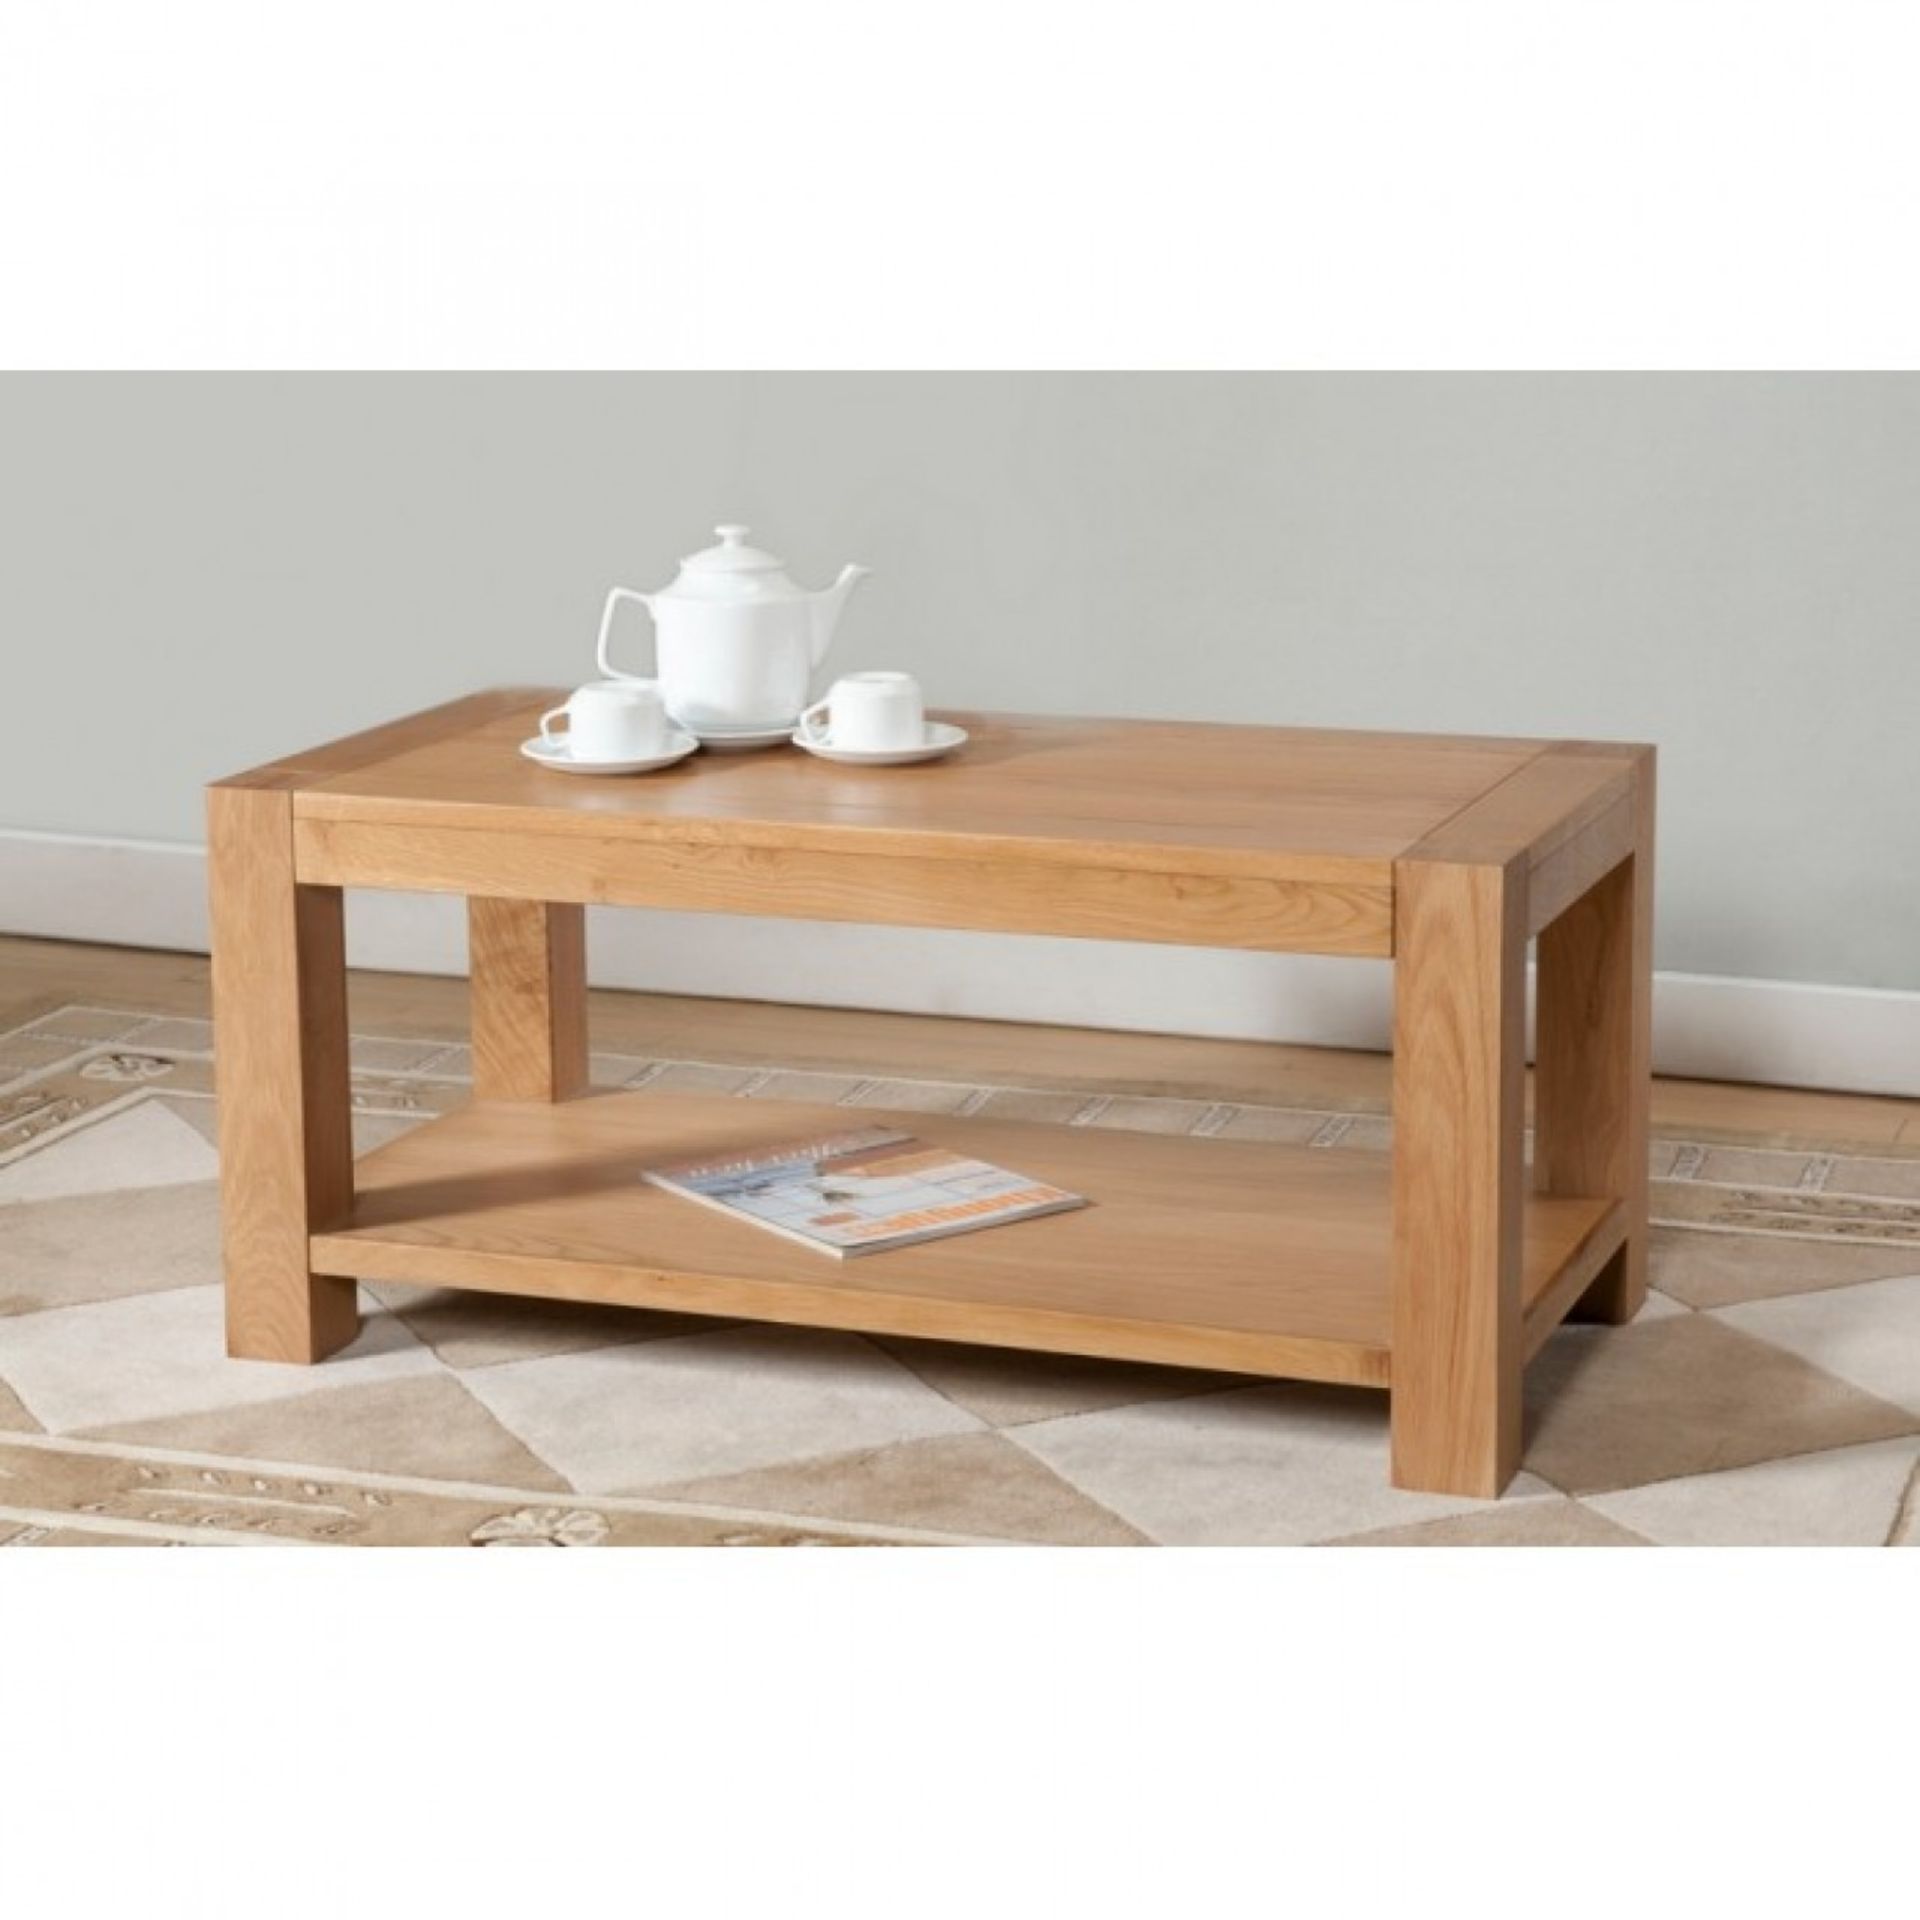 V Grade A Brand New Lucerne Oak Coffee Table With Under Shelf RRP: £159.99